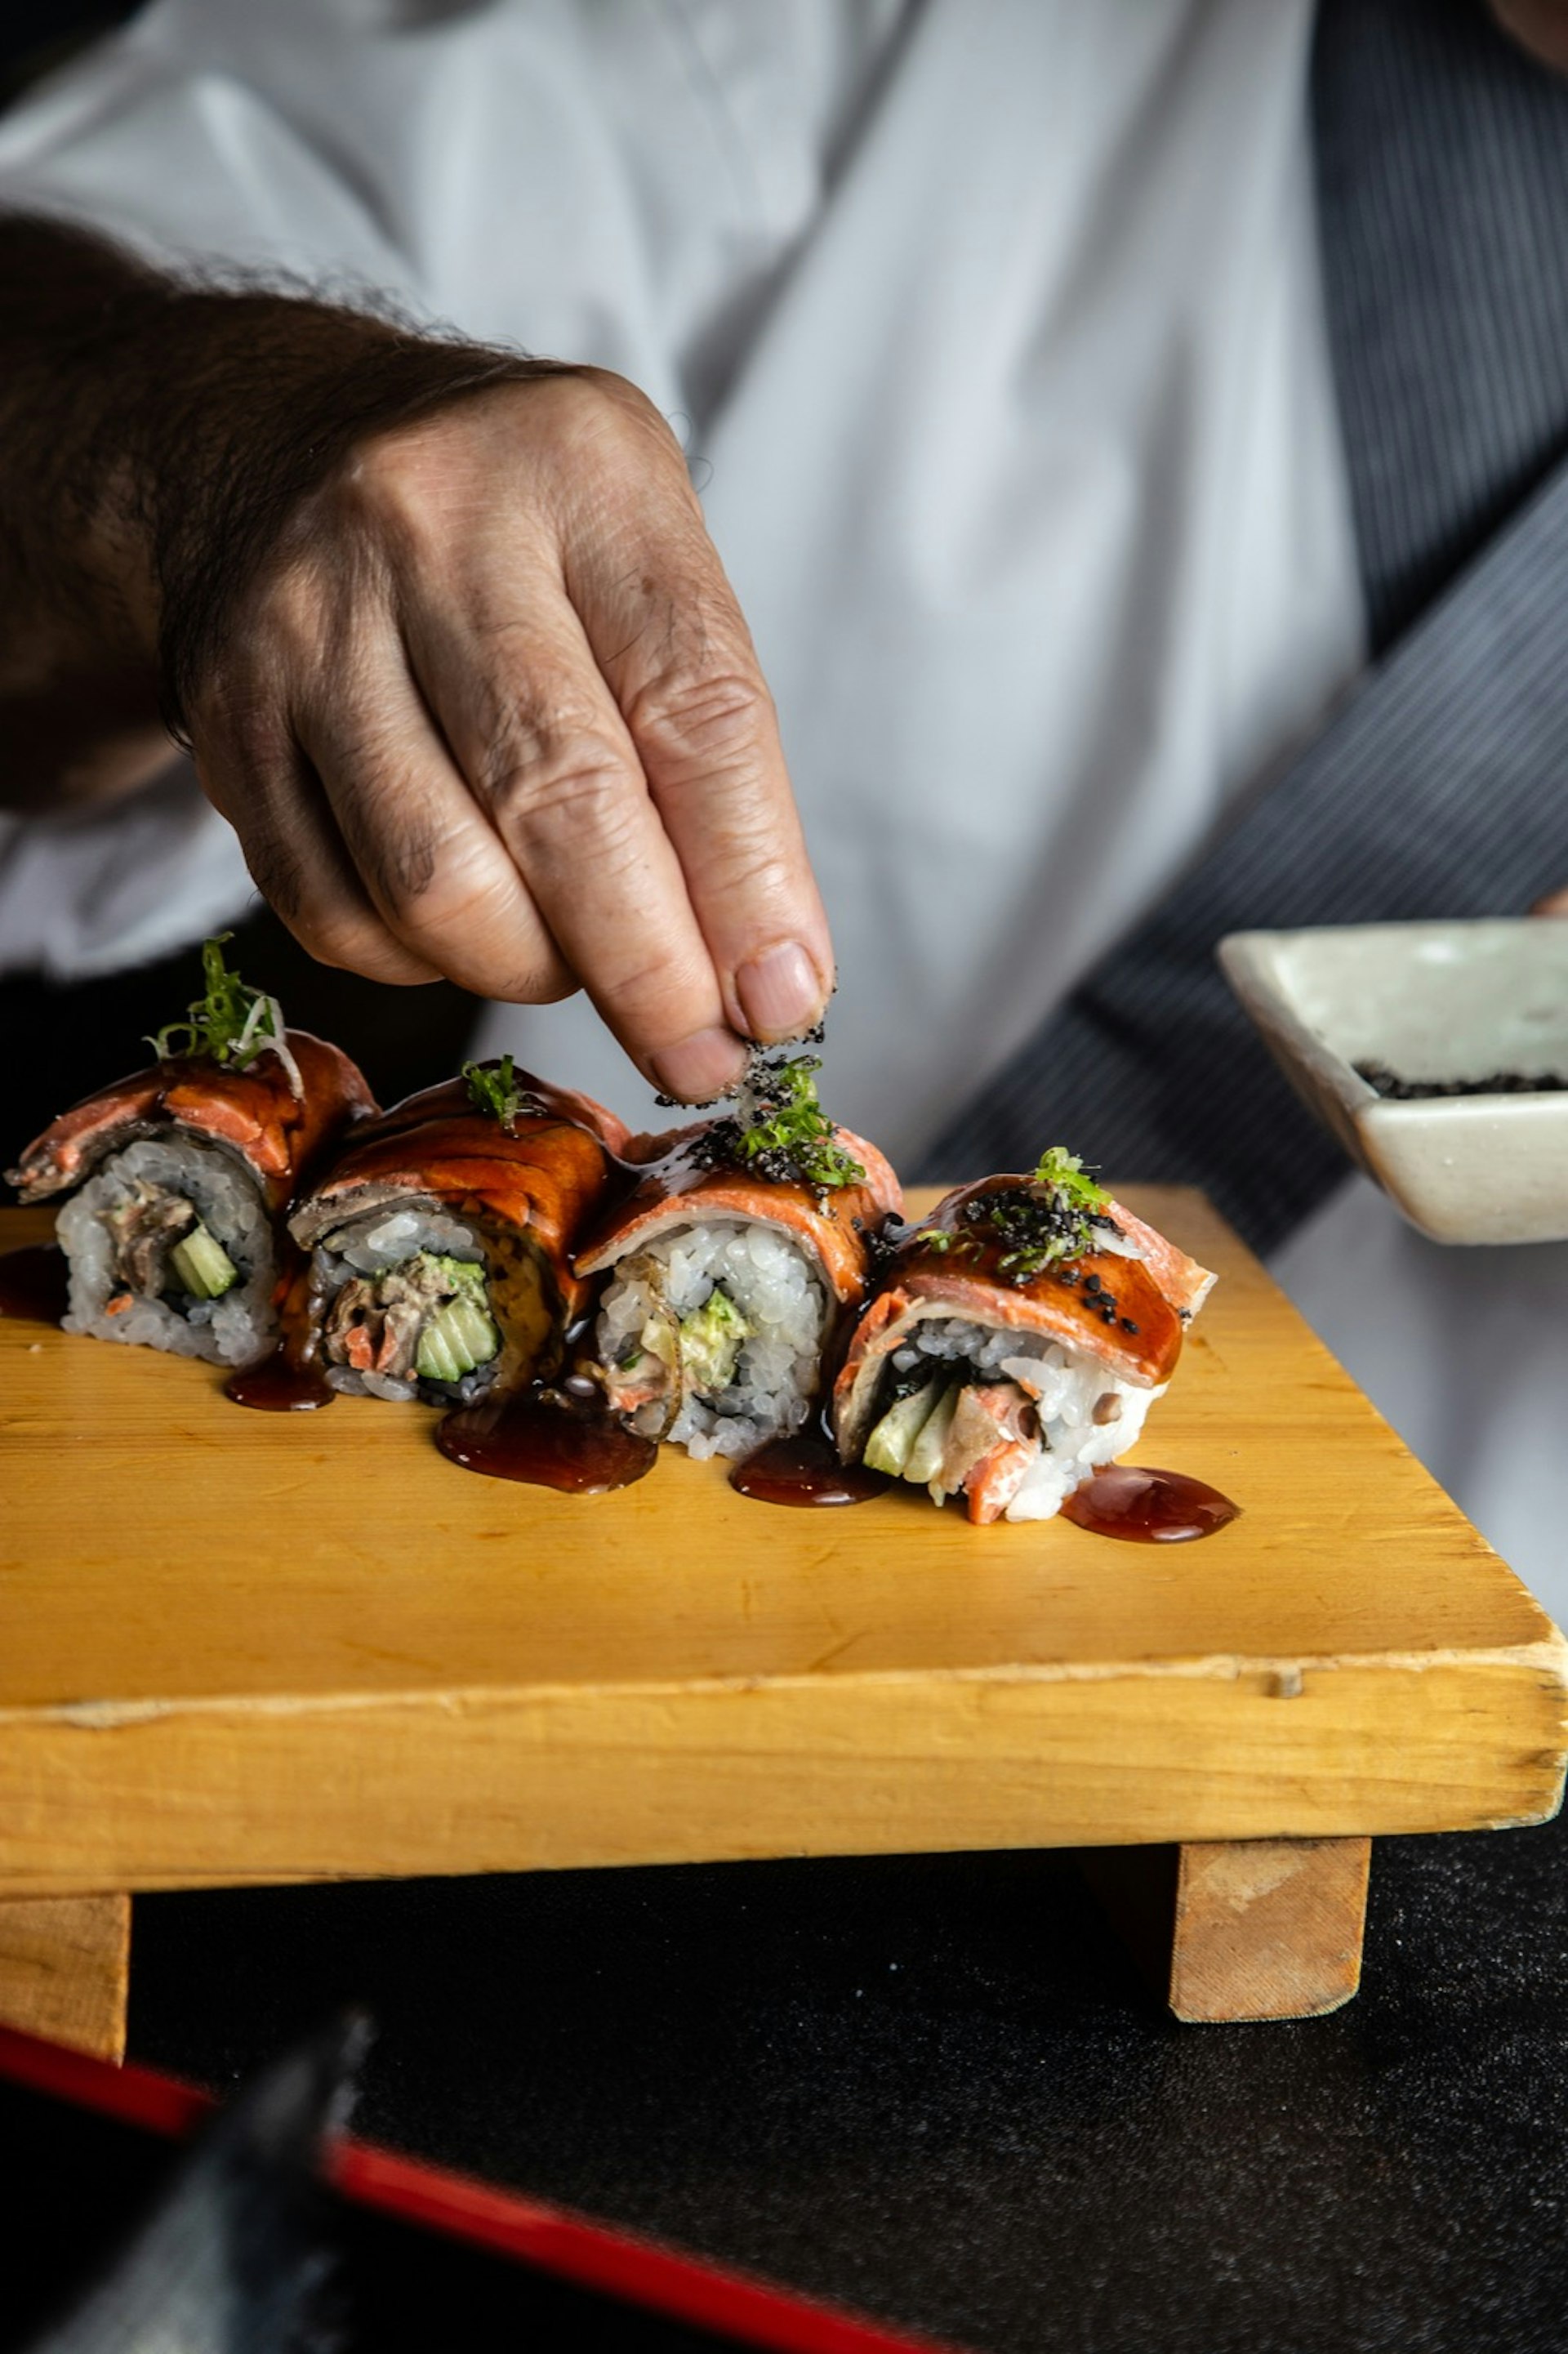 A chef's hand adding ingredients to a BC roll on a wooden cutting board; California roll 